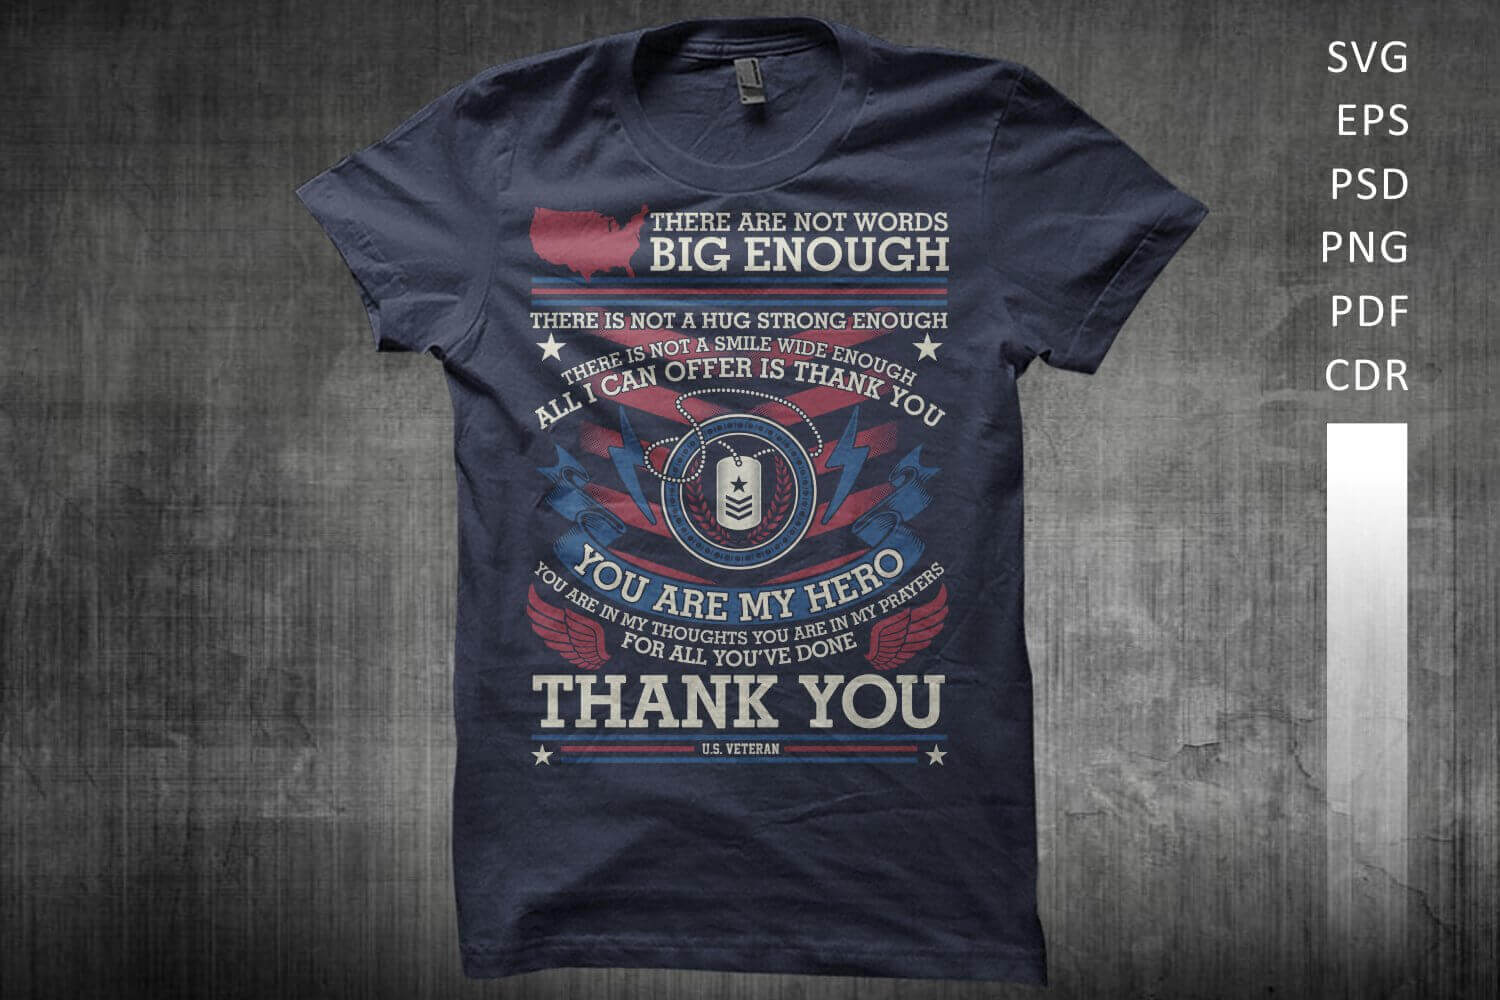 Blue T-shirt with the words "You are my hero", "Thank you" and others.